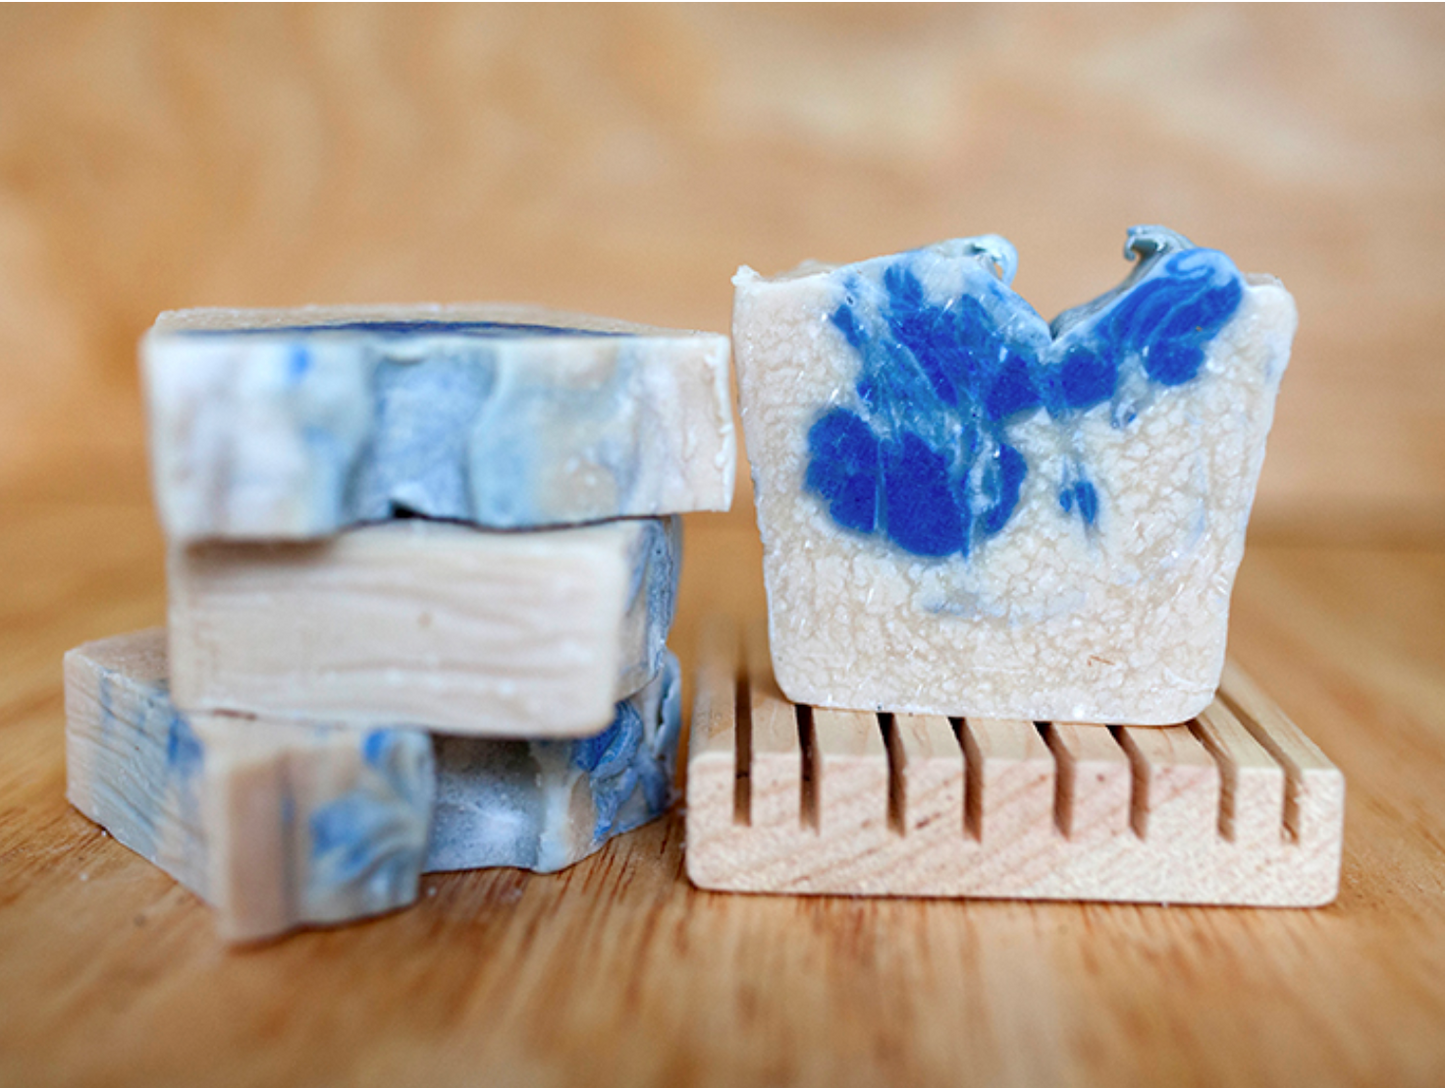 Caribbean Blue - Warm Nutty Scent Body Soap